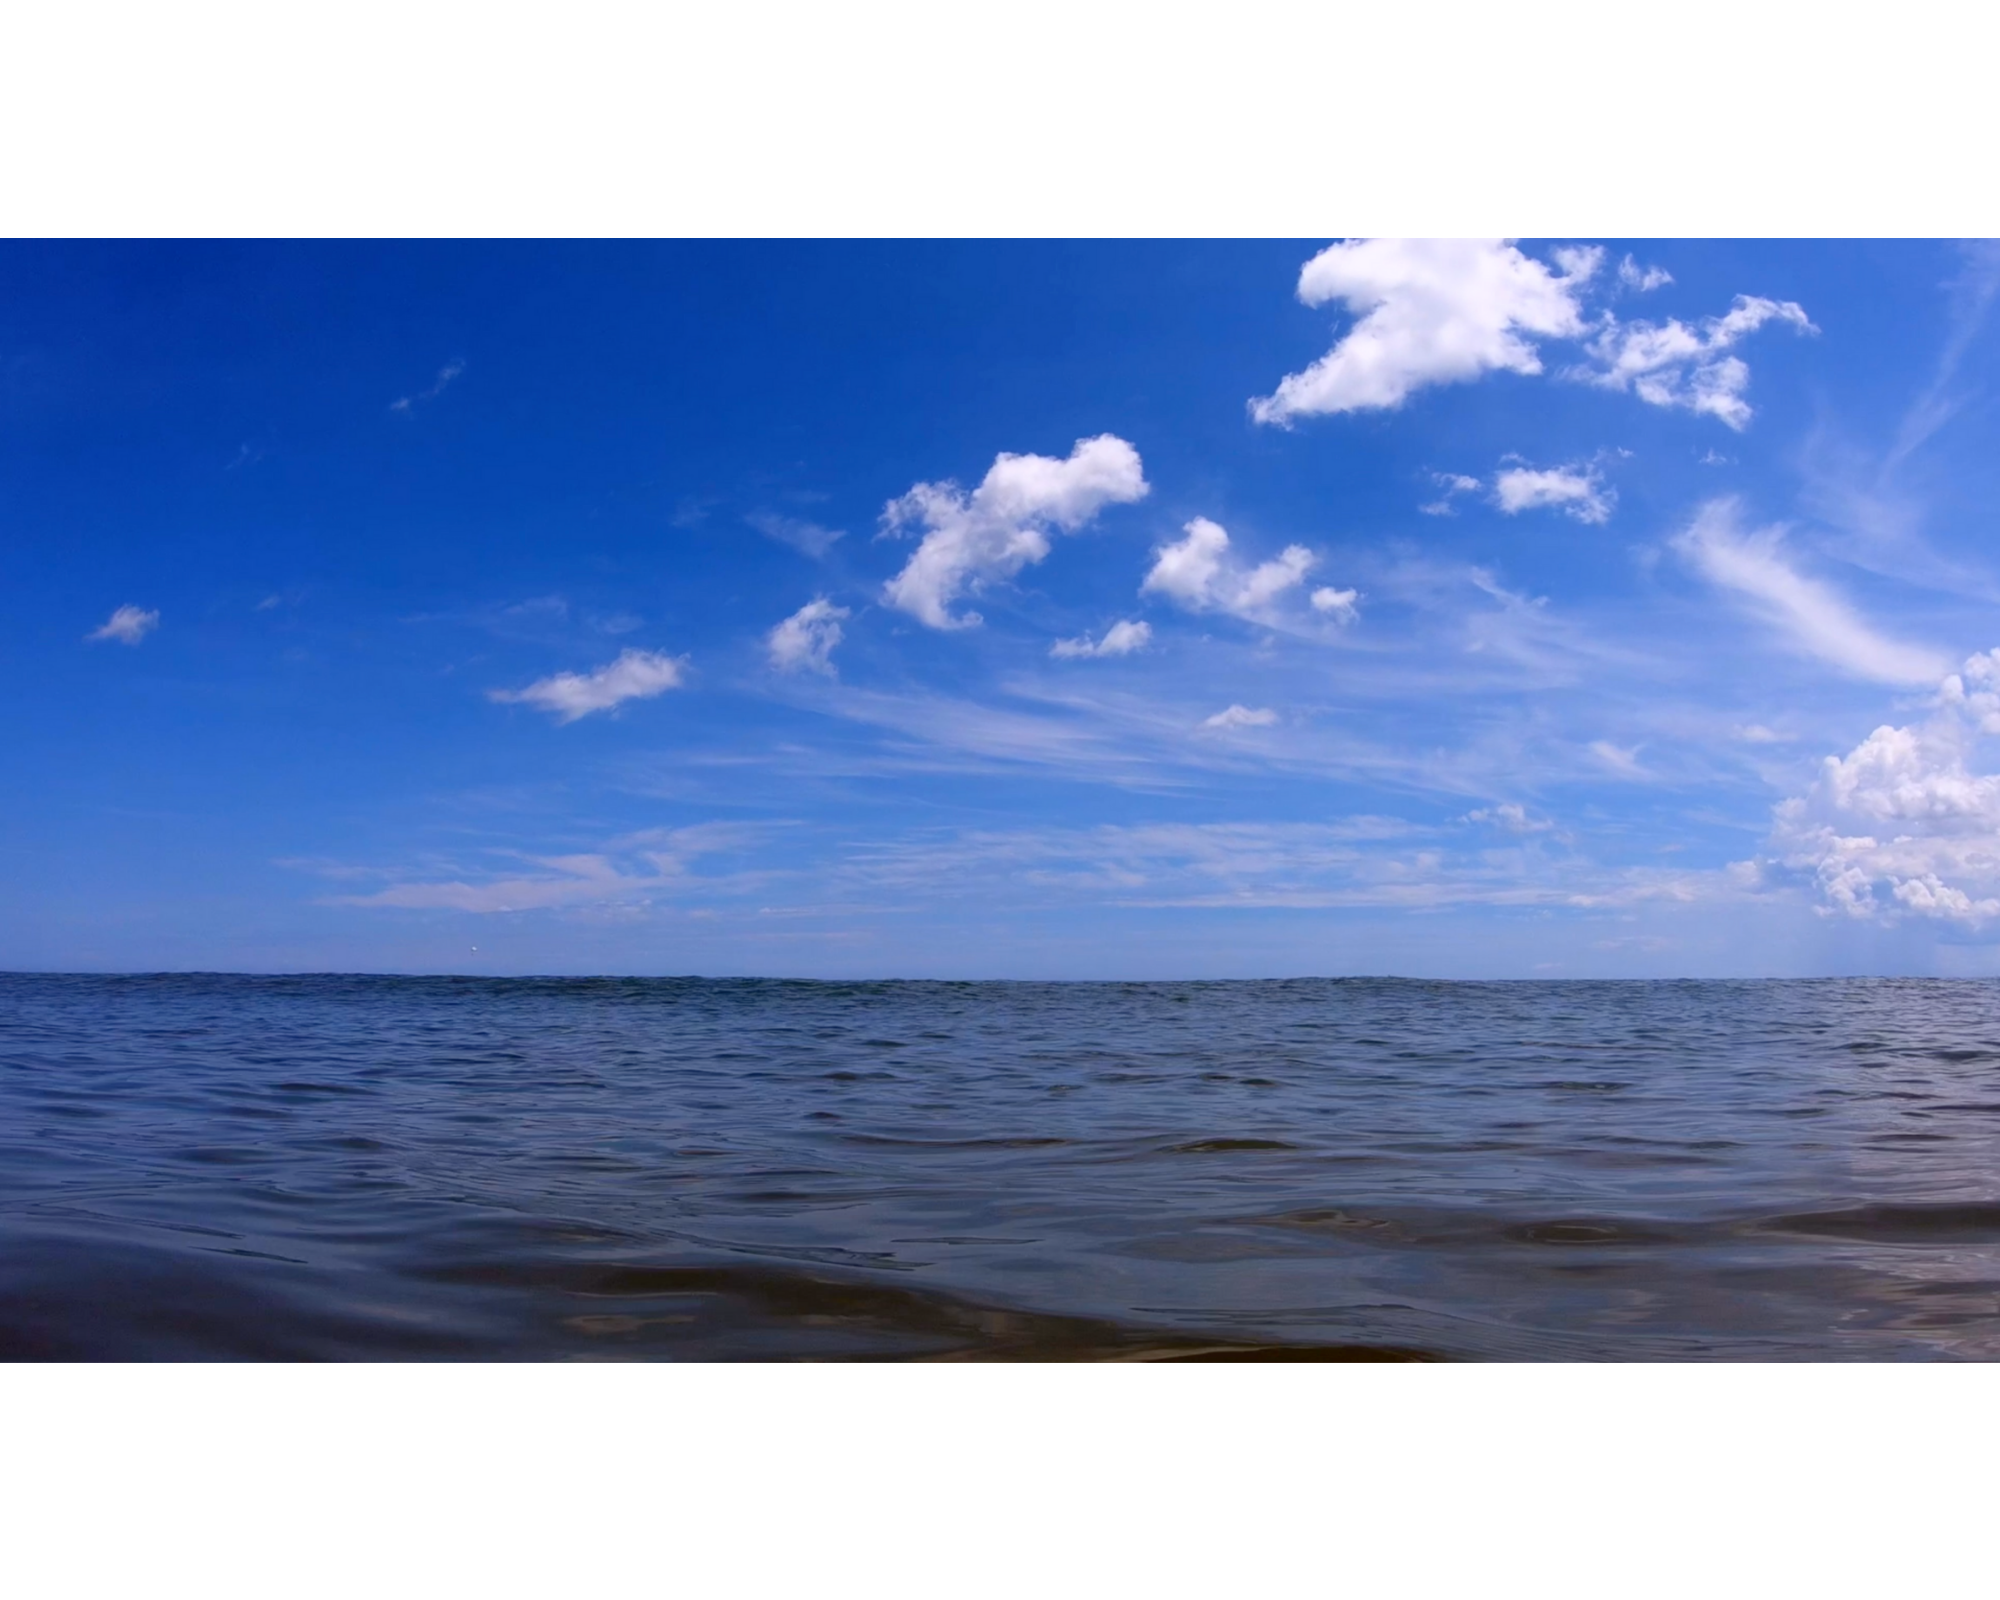 Still from Hopinka's "Cloudless Blue Egress of Summer": slightly cloudy blue sky filling top of frame with ocean water below the horizon line.